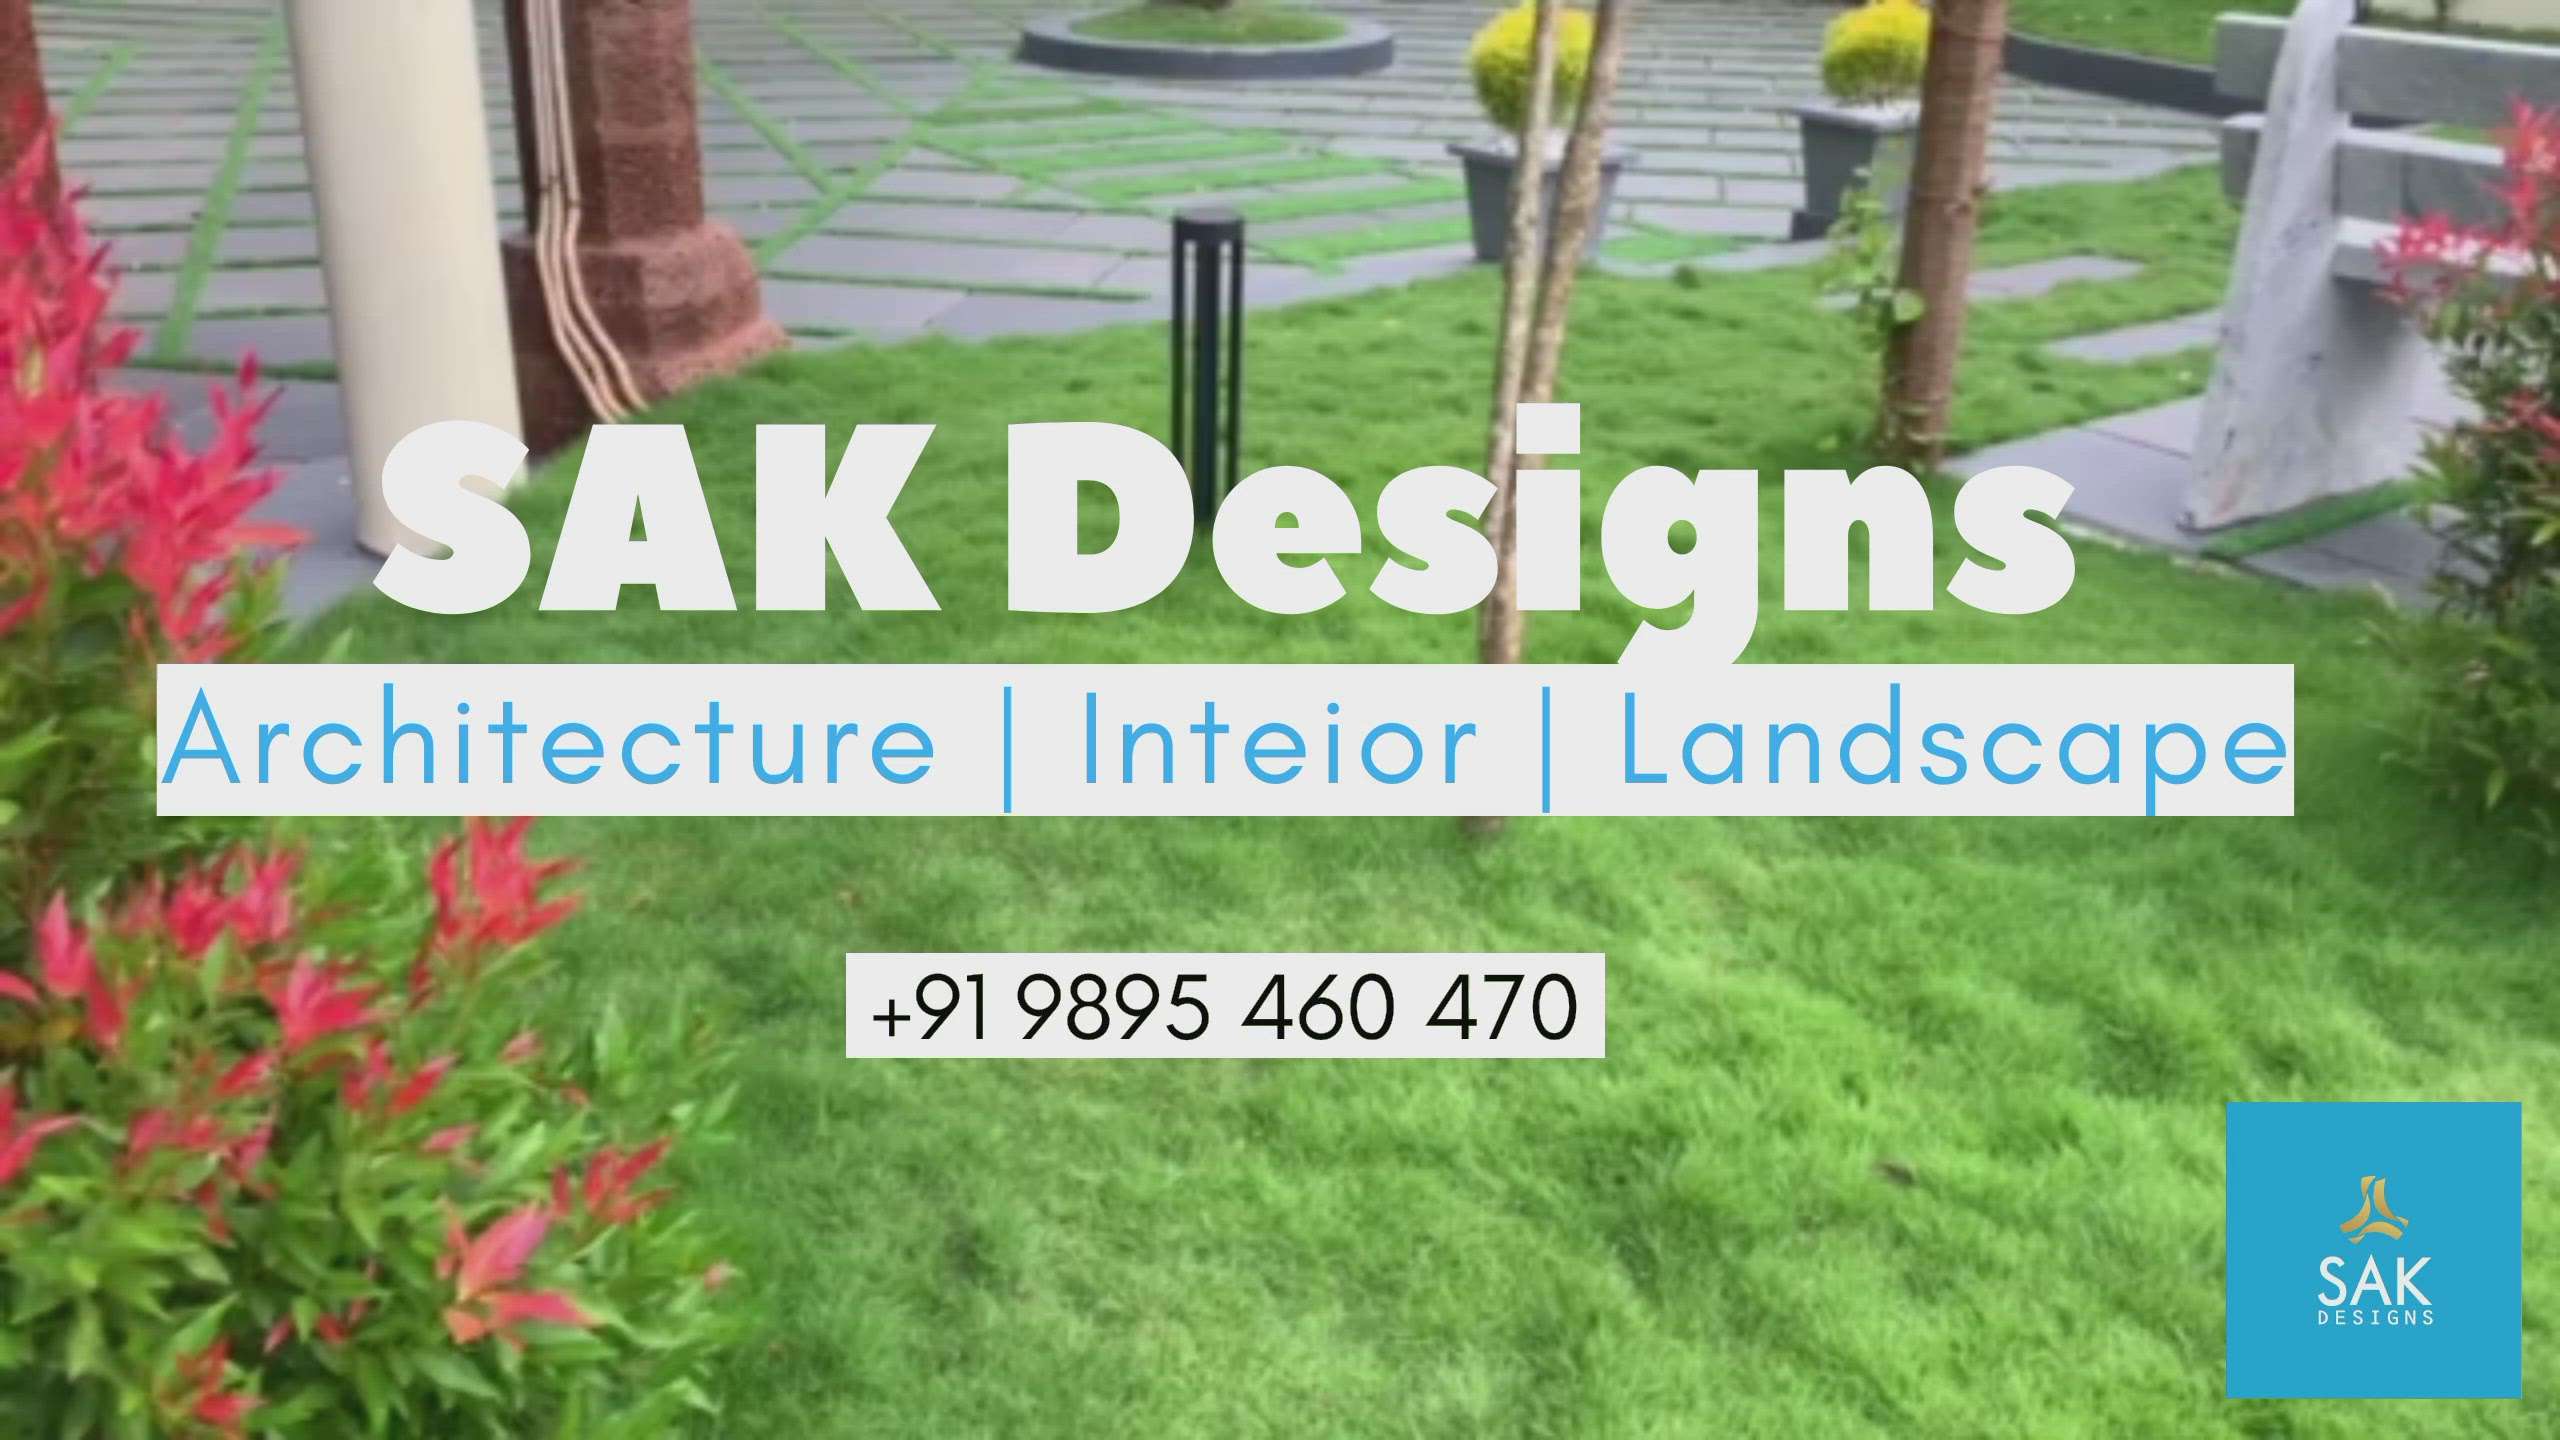 Landscaping at its best!!! 

Contact: SAK Designs
Mobile: +91 9895 460 470

For more videos, please subscribe to the YouTube channel: 👉 SAK DESIGN STUDIO 👈
https://youtube.com/@sakdesignstudio7149

#LandscapeGarden #LandscapeIdeas #Landscape #LandscapeDesign #landscapinggrass #koreangrass #MexicanGrass #PearlGrass #homegardening #homegarden #beautifullandscape #NaturalGrass #naturalstones #patio_garden_area #patiodesign #stonebench #plant #outdoorplant